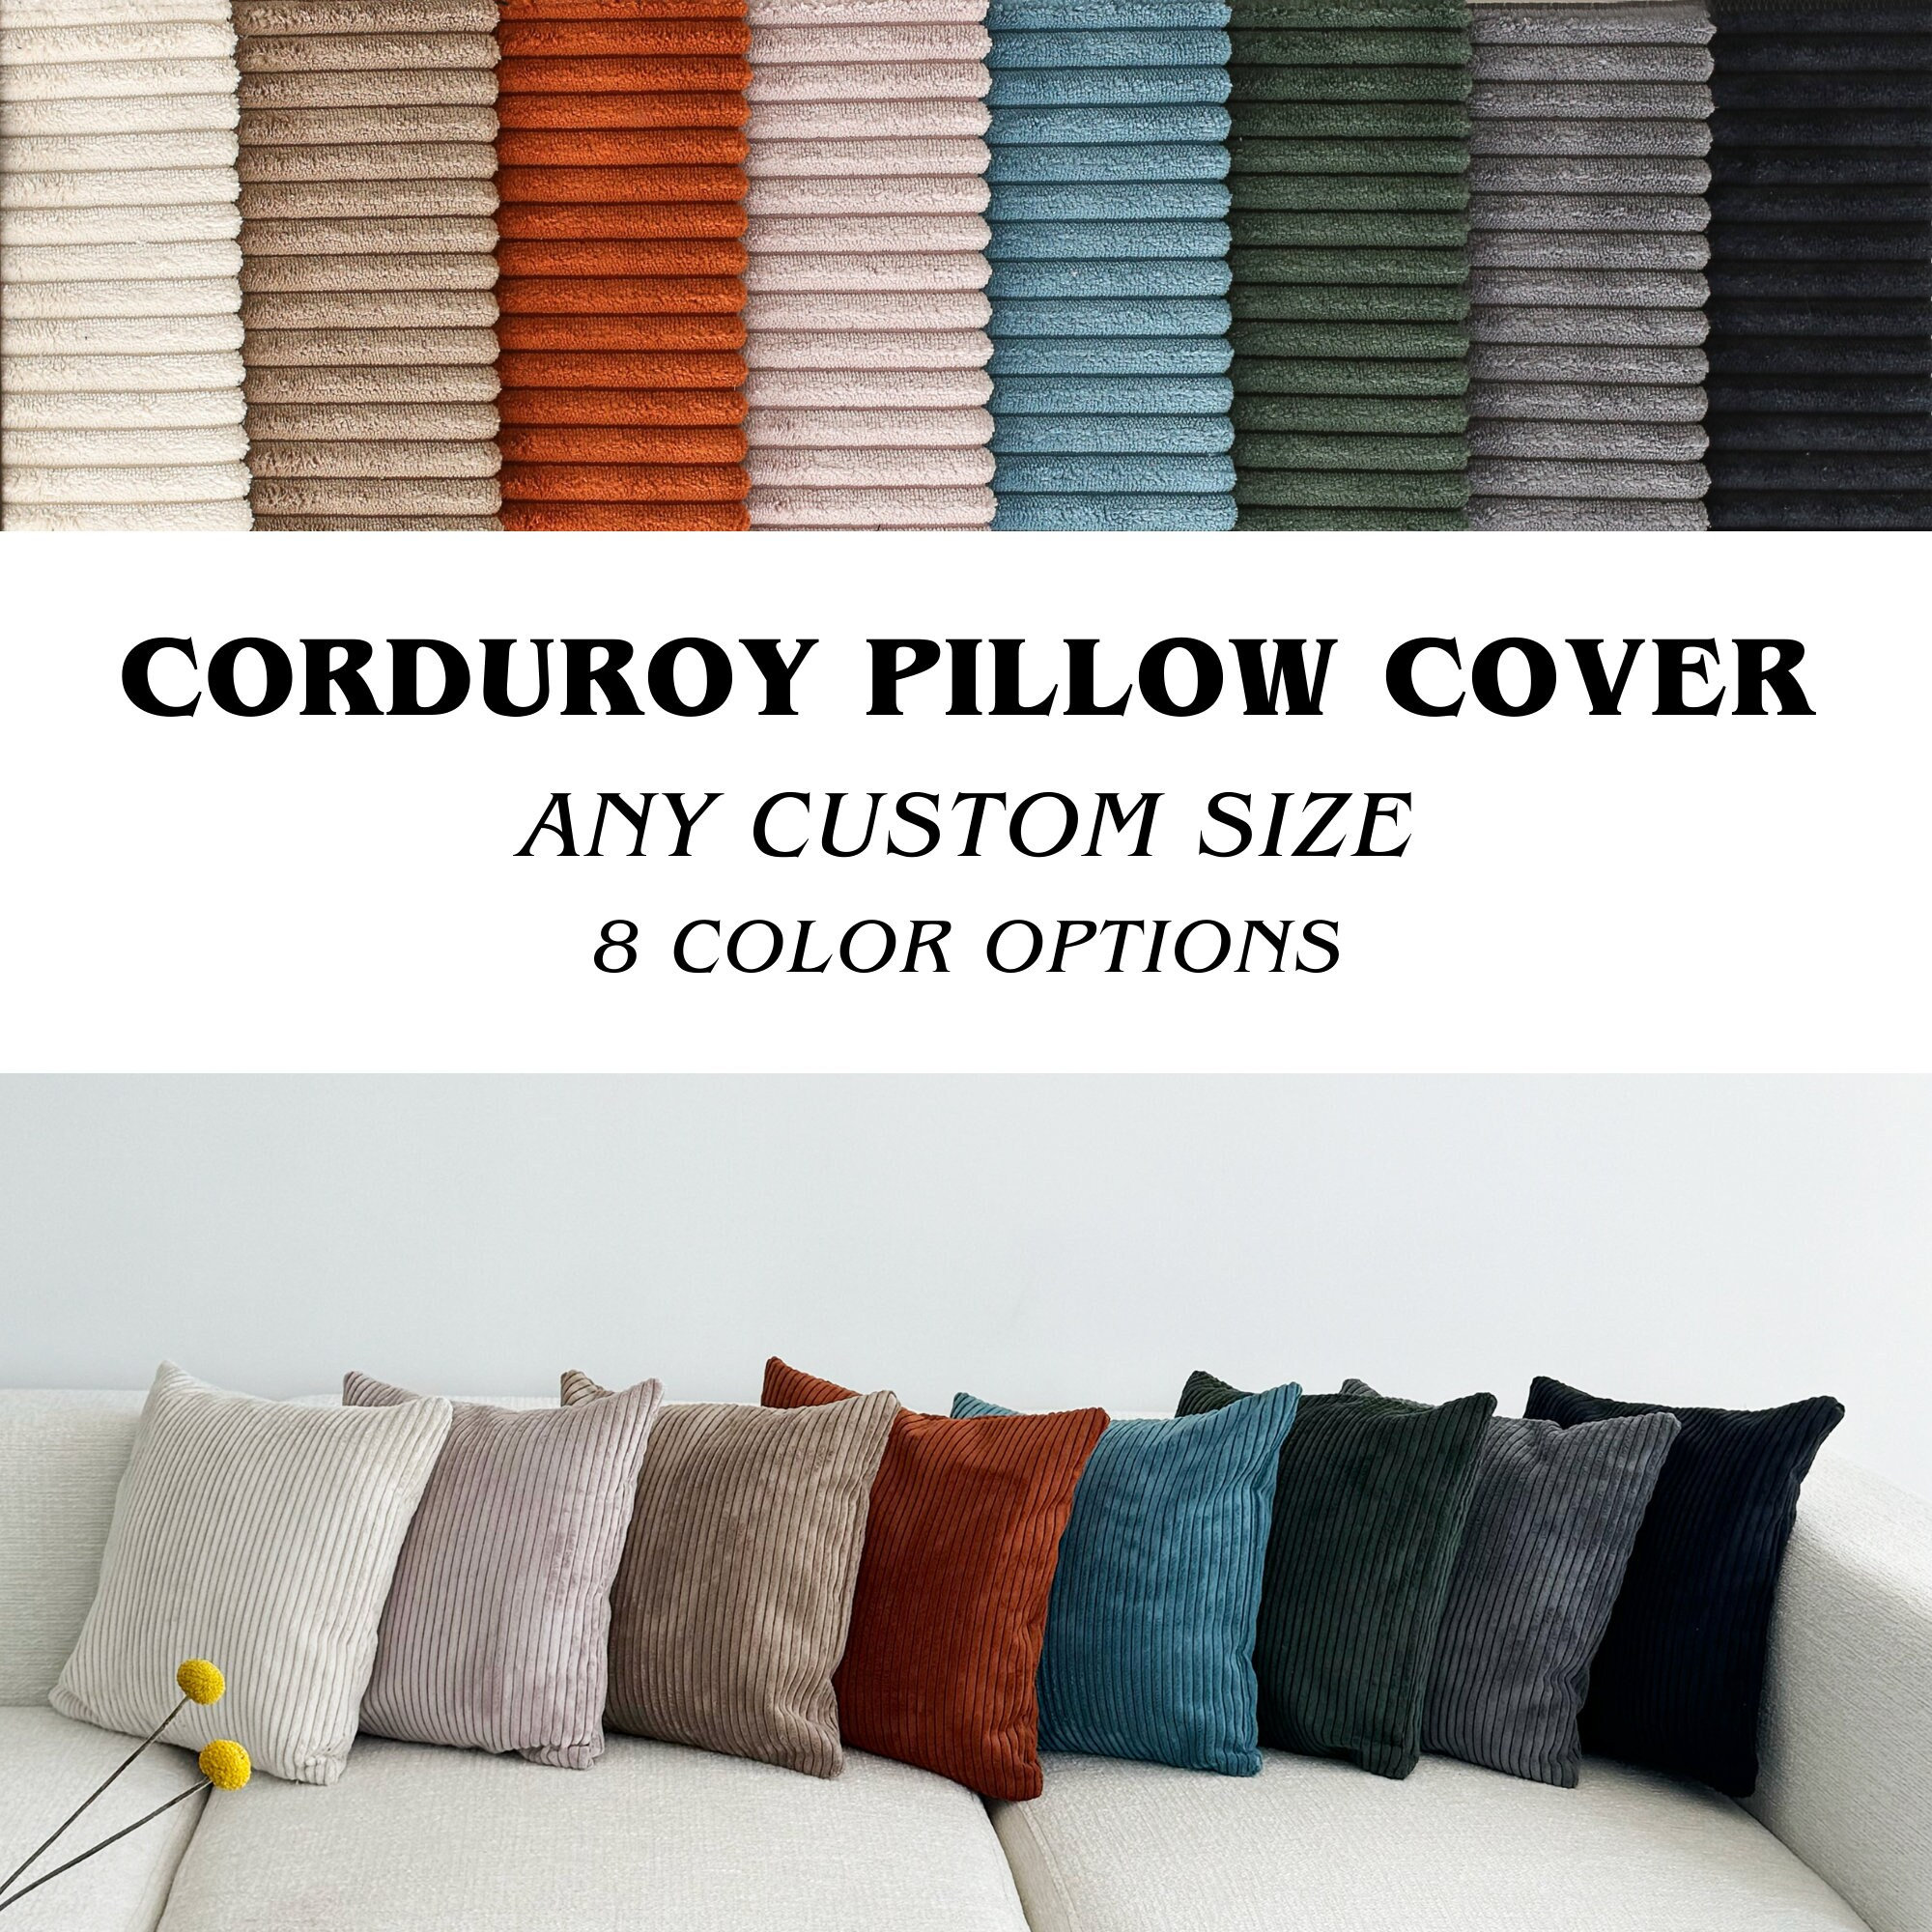 Corduroy Throw Pillow Cover, Any Size Super Soft Cord Velvet